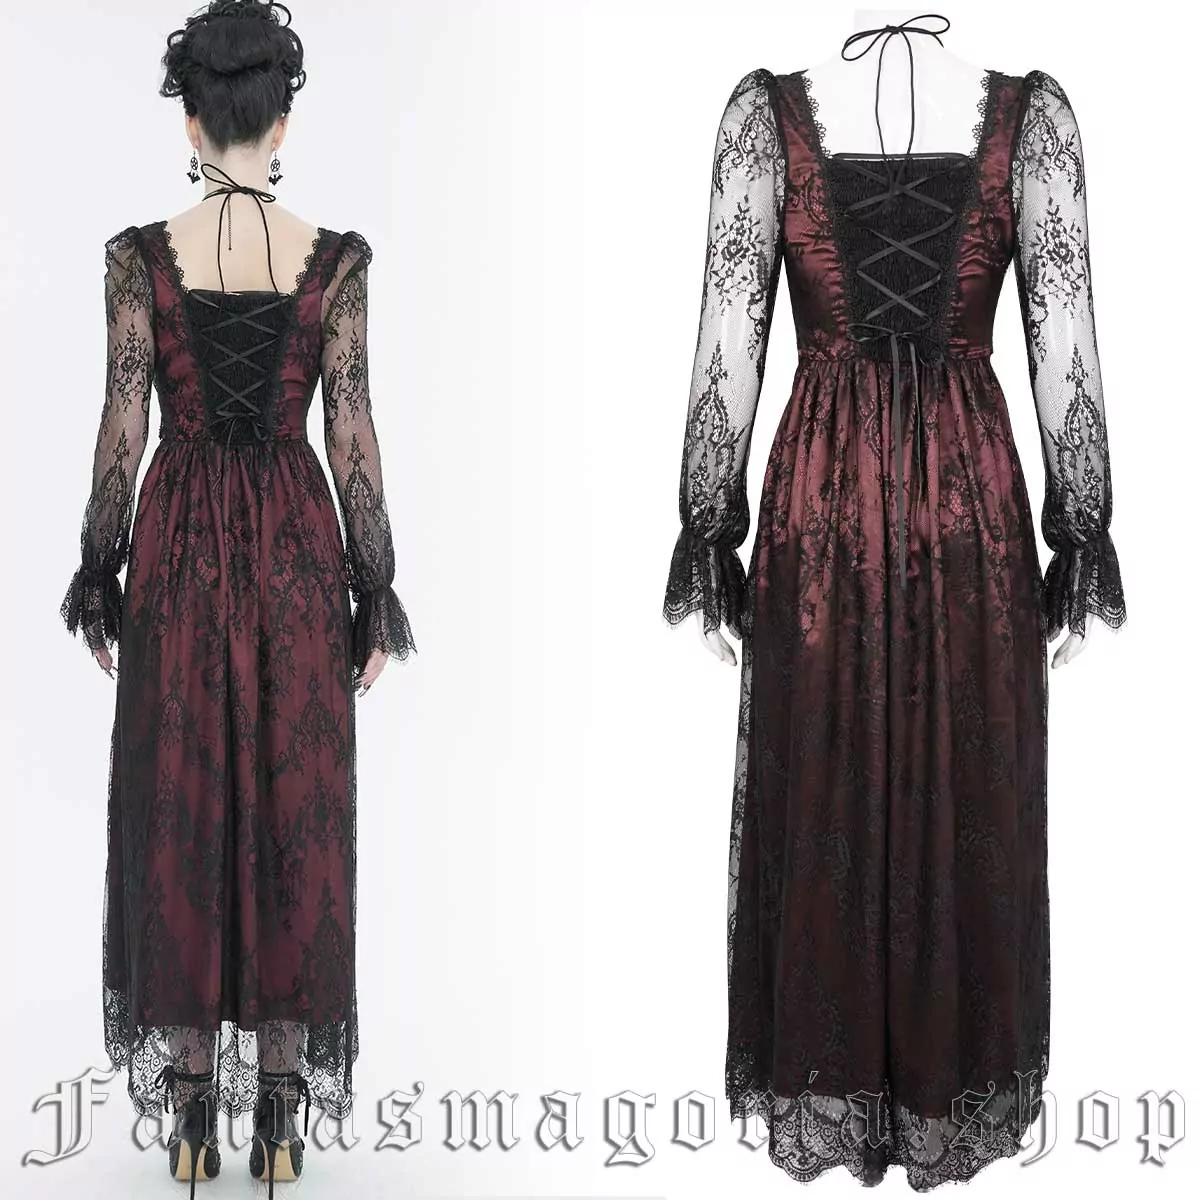 Unique Gothic Wedding Dress, Steampunk Costume, Goth or Steampunk Wedding,  Rockabilly Dress, Victorian Gown, Black and Red Wedding Dress -  Canada